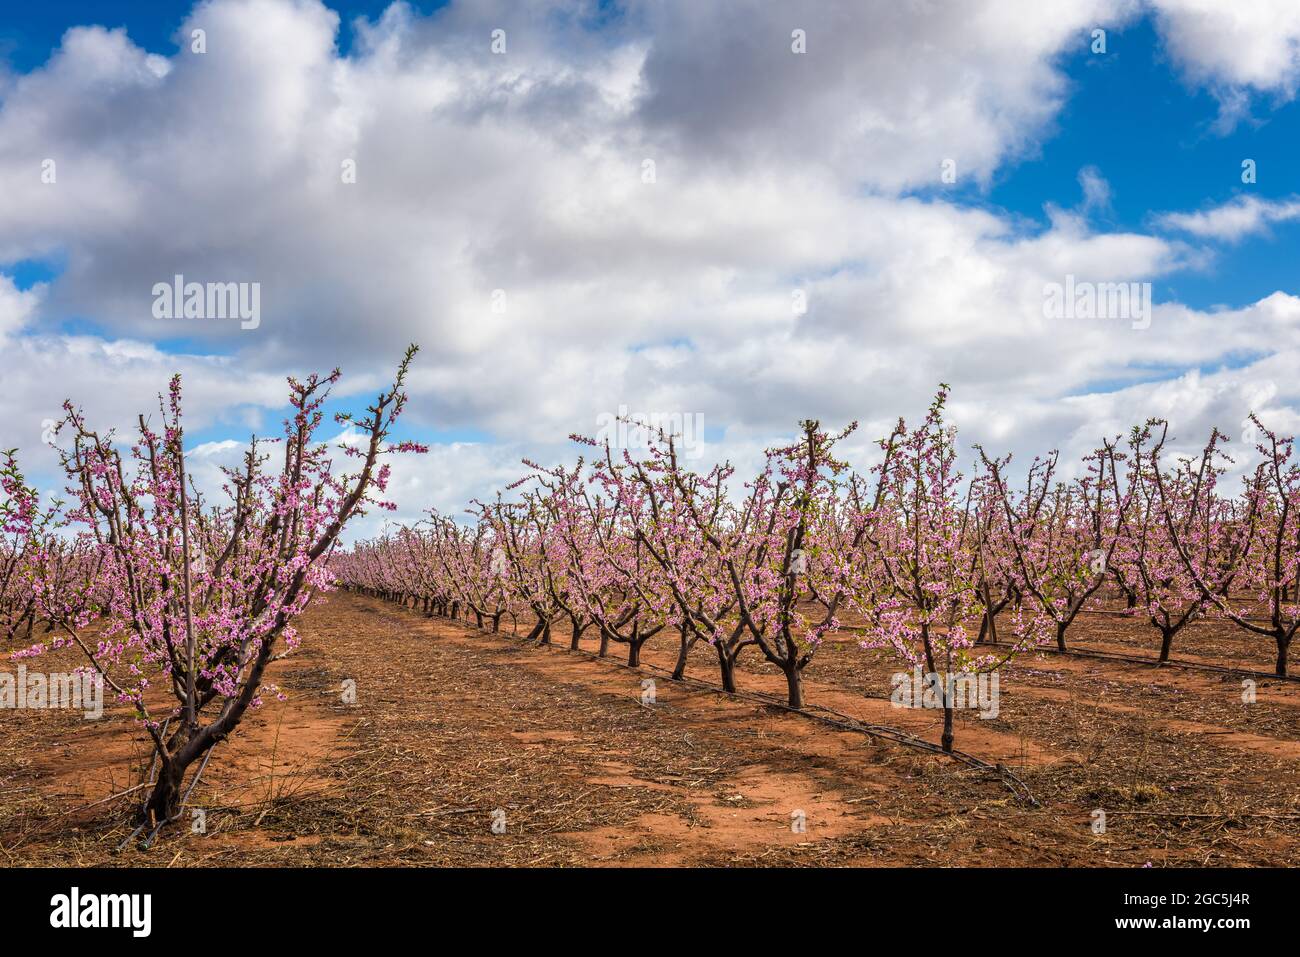 Pink field of flowering peach trees with gorgeous pink blossoms in the early spring under cloudy skies in an orchard in South Australia. Stock Photo